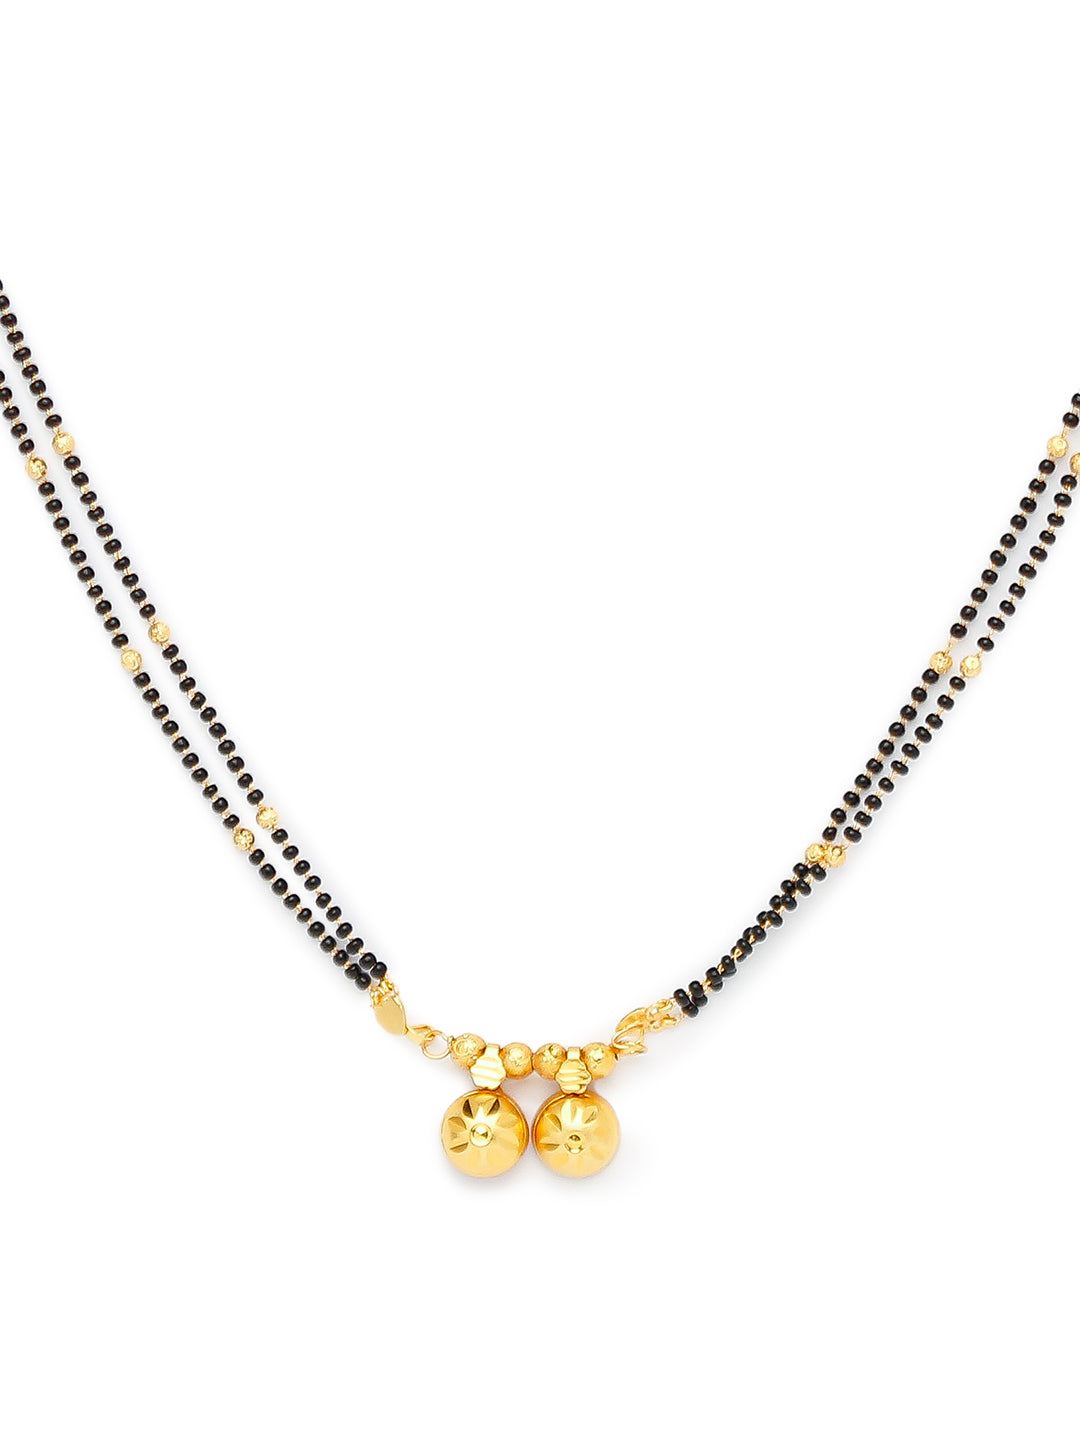 Combo Set of 2 Short Mangalsutra Designs and Long Mangalsutra Designs Gold Plated with Vati Pendant